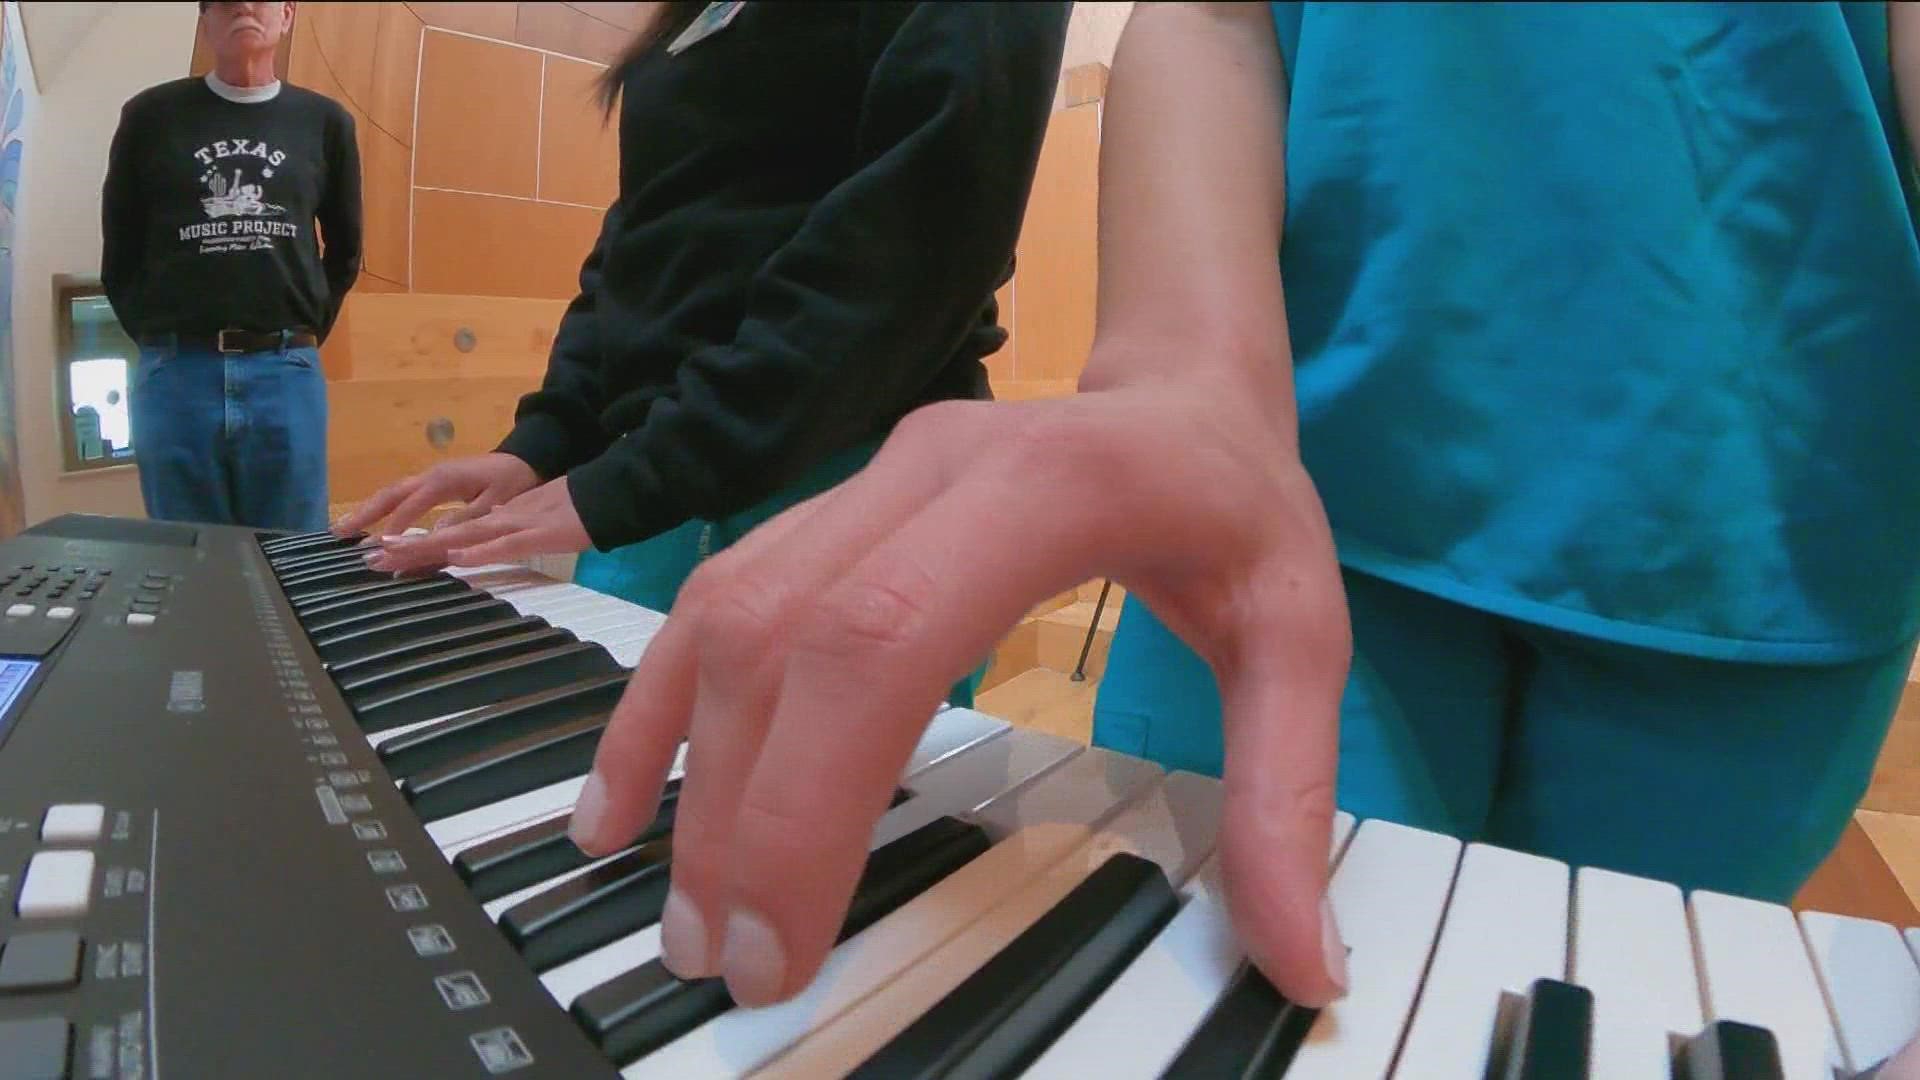 The piano, which will be used in the center's music therapy program, was donated by the Texas Music Project.